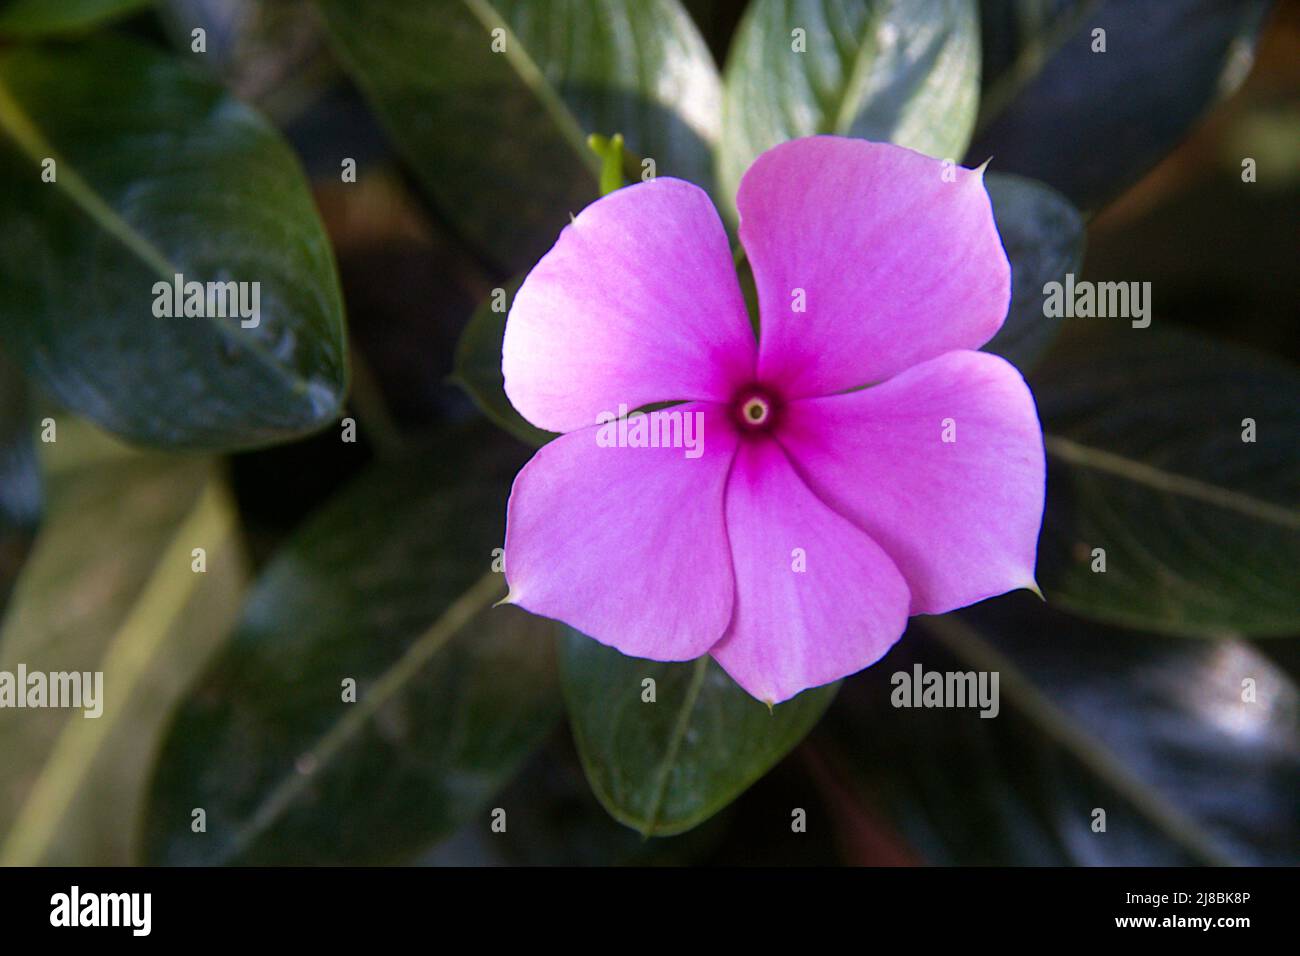 View of Catheranthus roseus commonly known as bright eyes, Cape periwinkle, graveyard plant, madagasker periwinkle, rose periwinkle having five petals Stock Photo